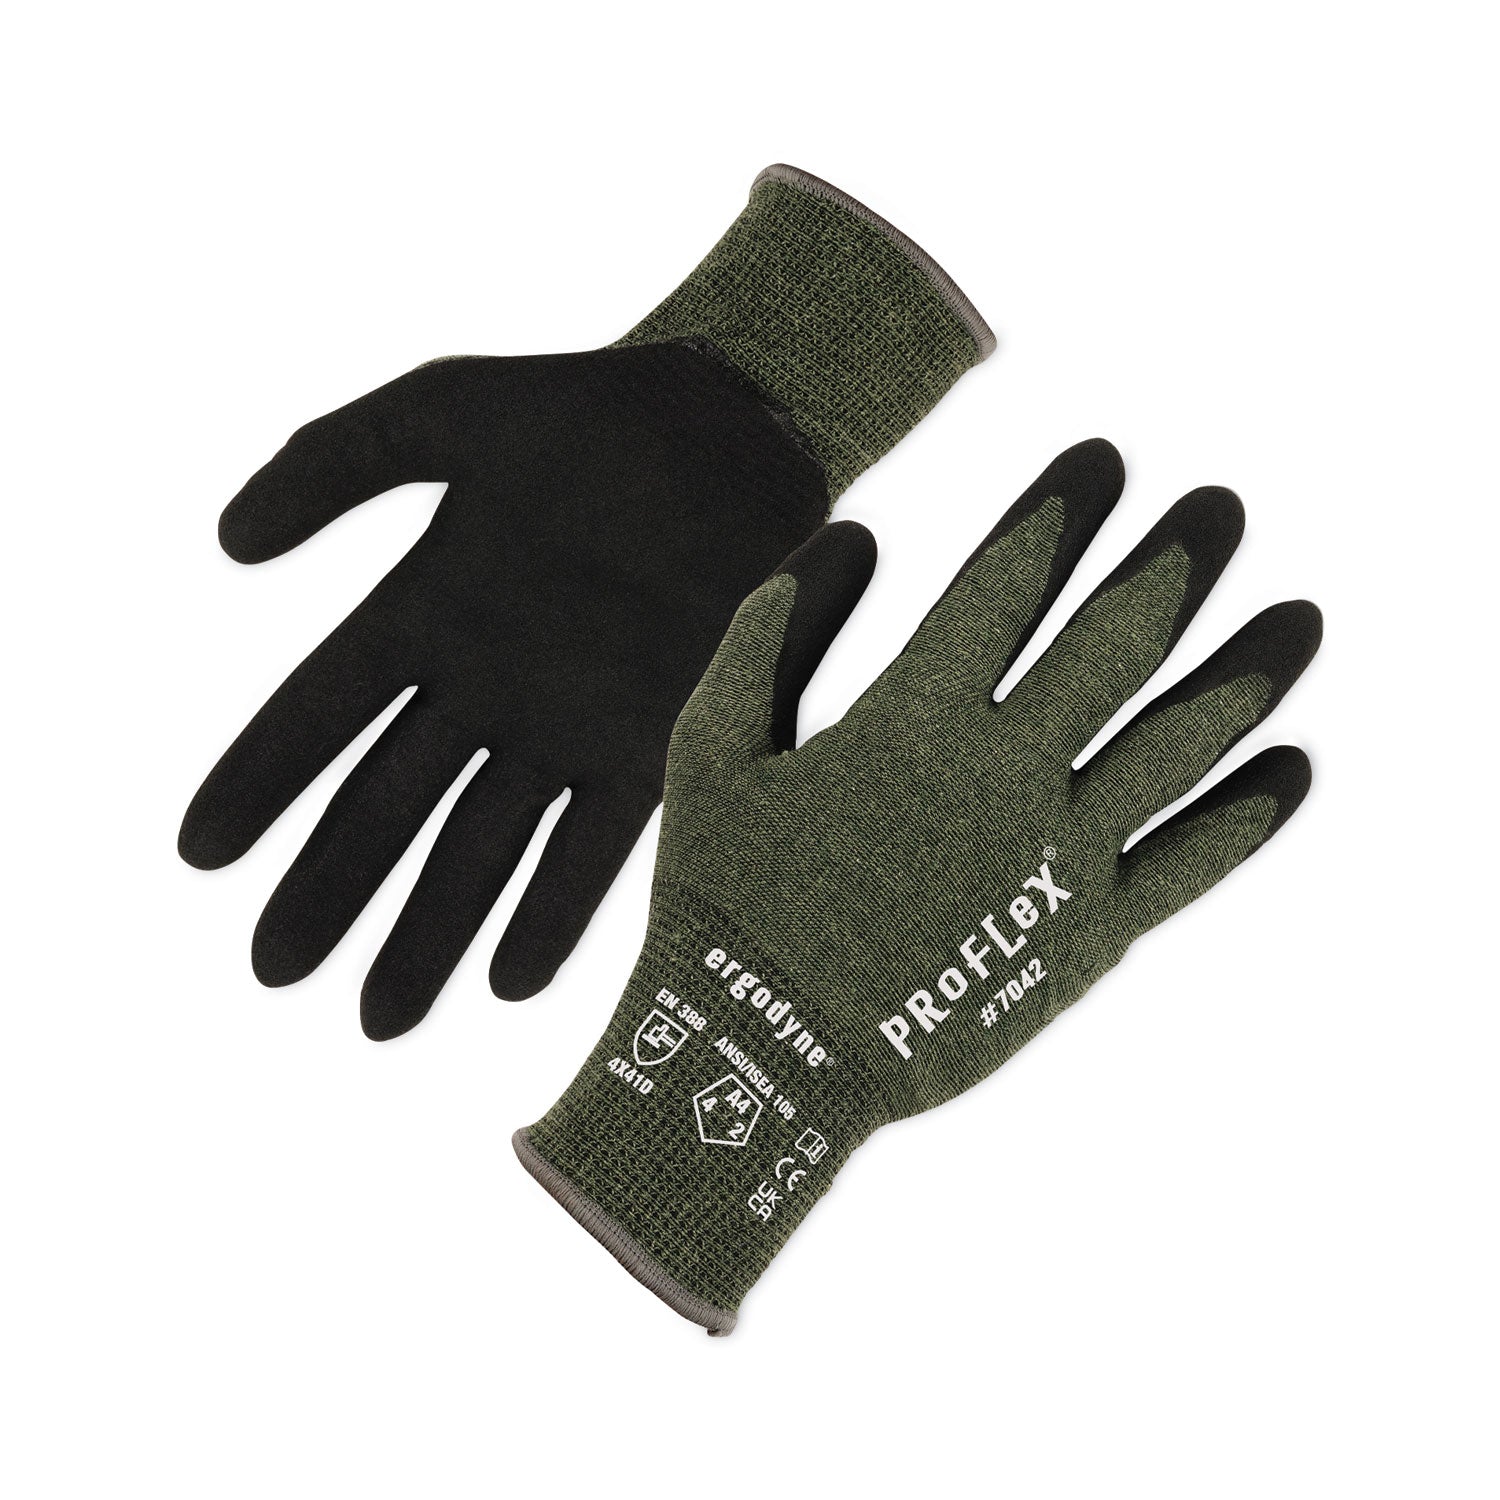 proflex-7042-ansi-a4-nitrile-coated-cr-gloves-green-large-pair-ships-in-1-3-business-days_ego10344 - 1